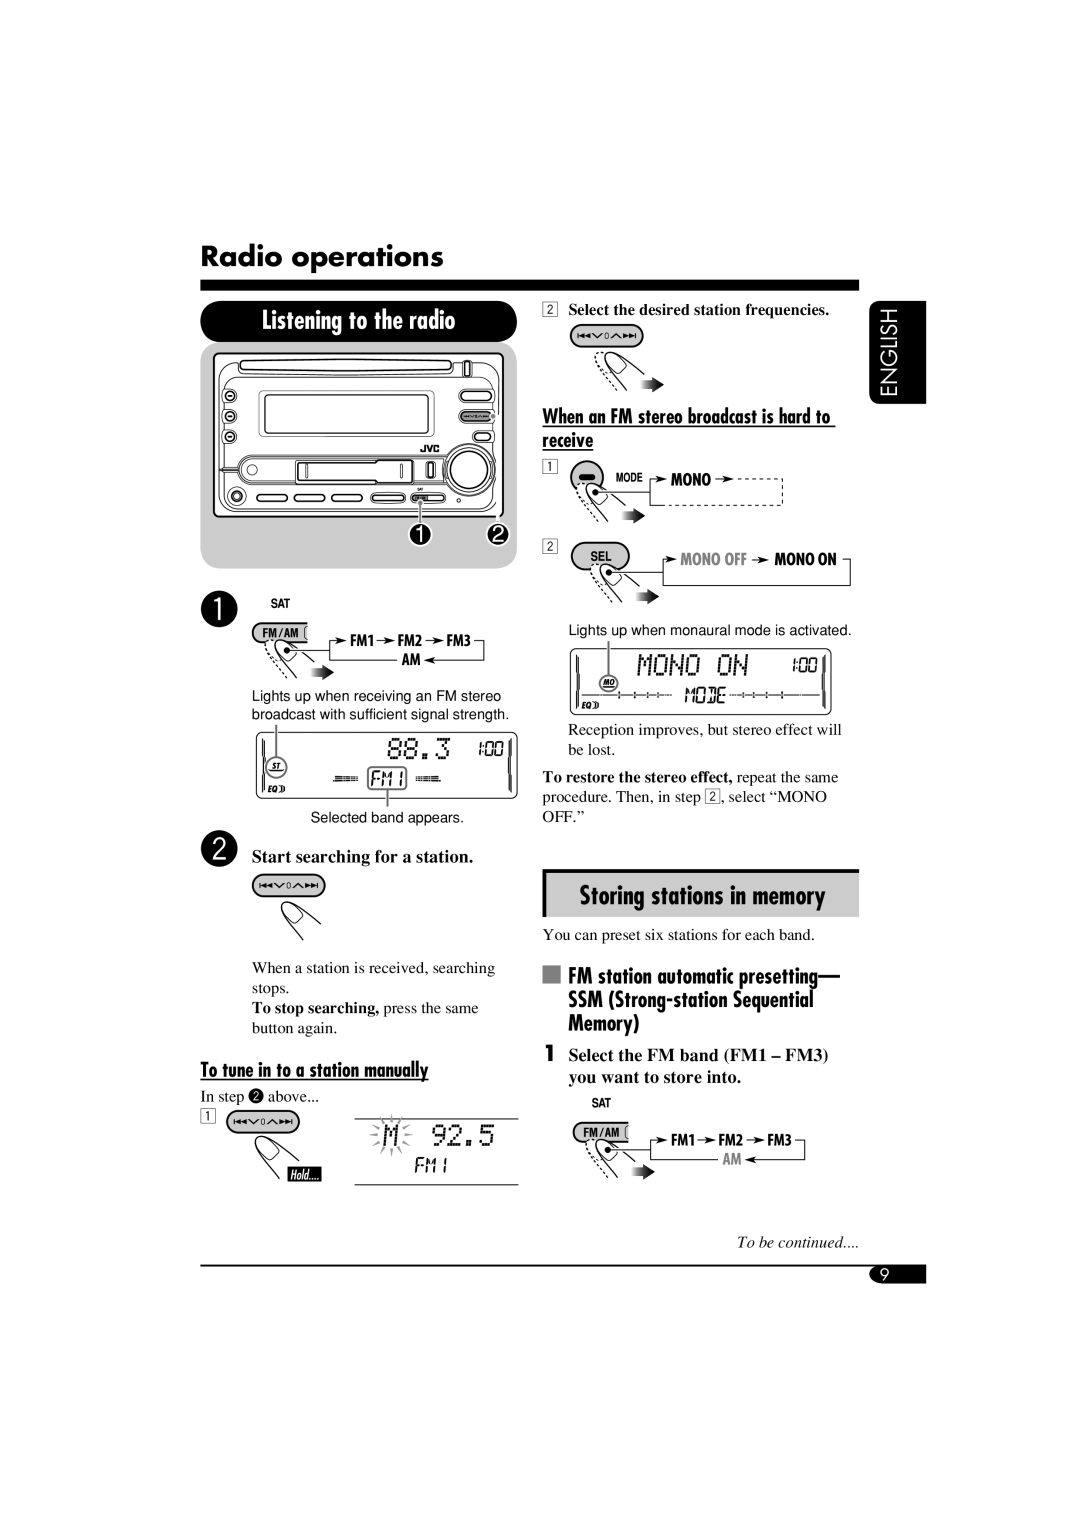 JVC KW-XC400 manual Radio operations, Listening to the radio, Storing stations in memory, FM station automatic presetting 